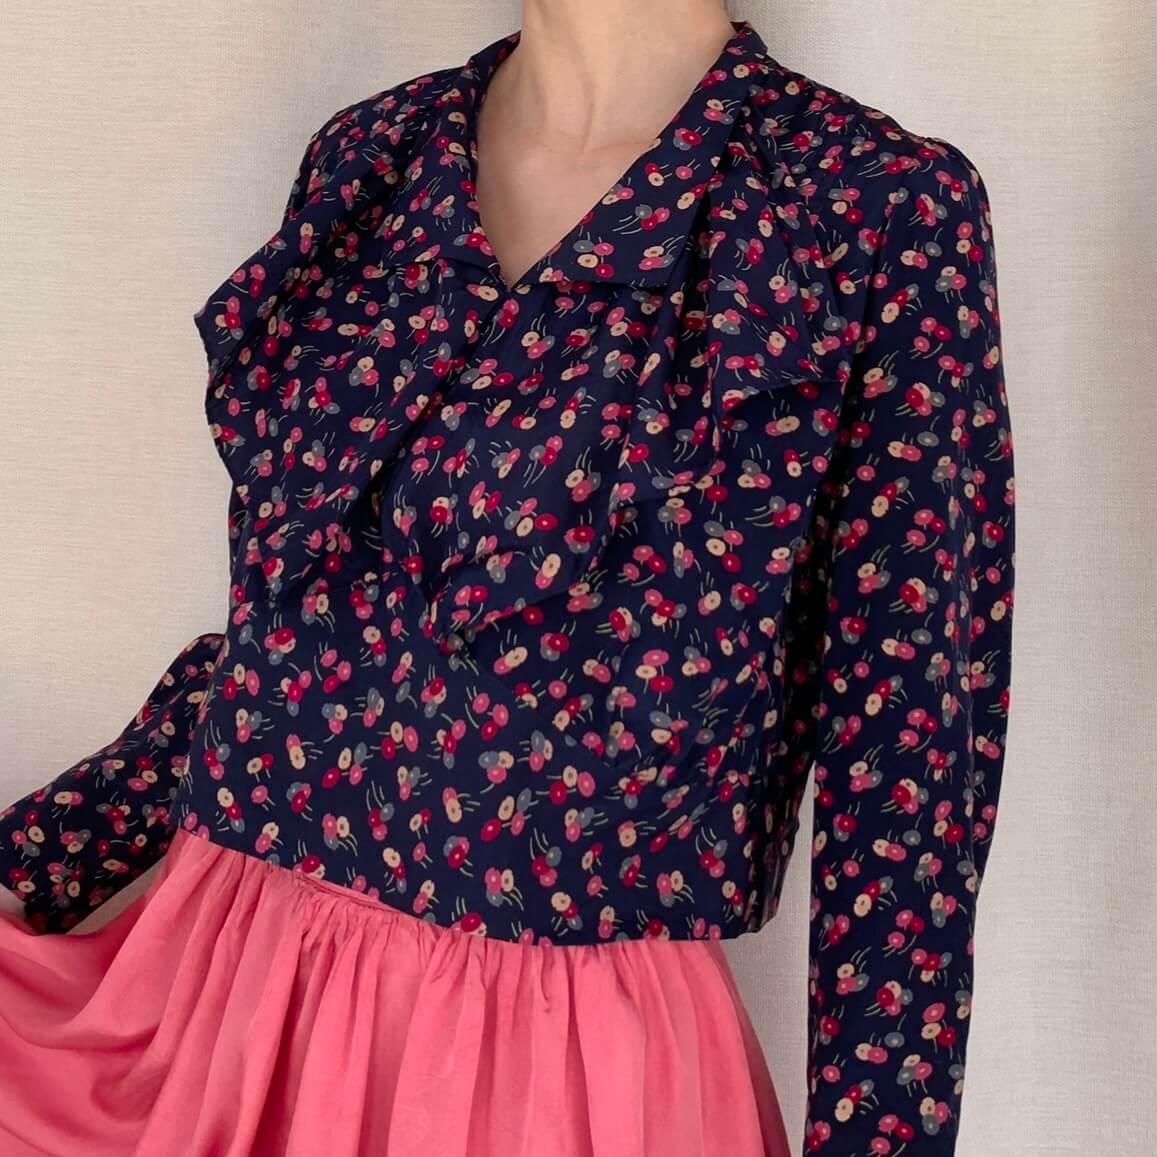 1920s printed silk blouse in a blue and pink floral pattern with a ruffle collar